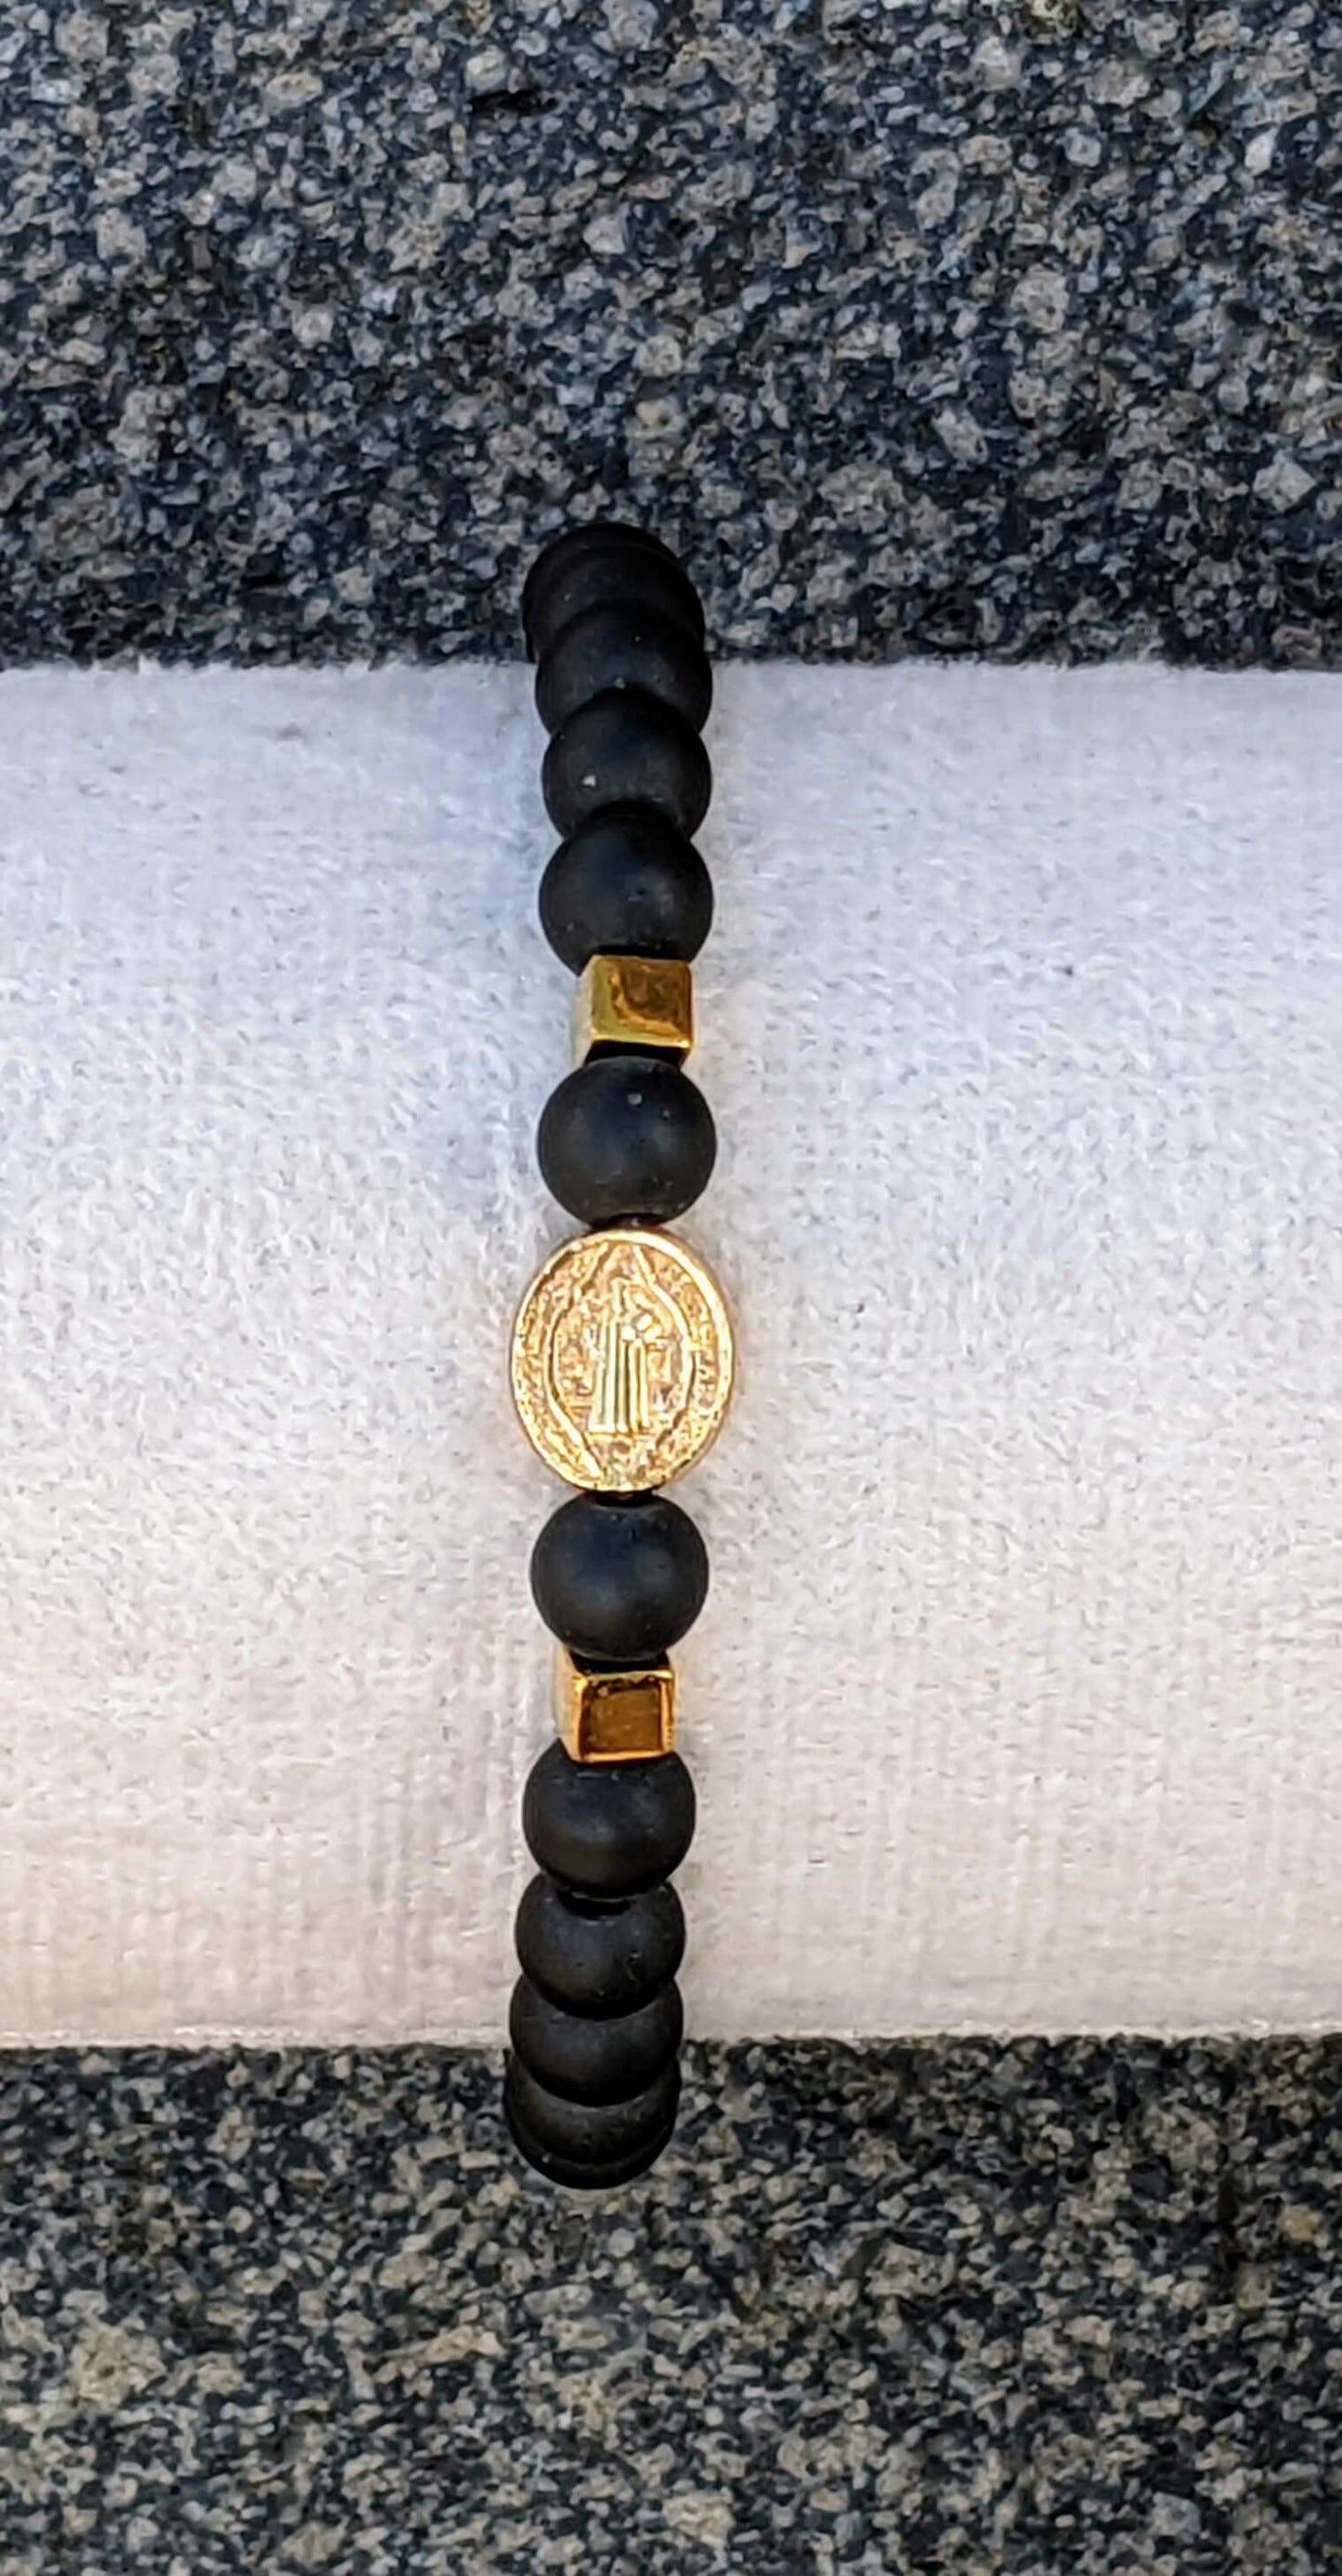 Black Onyx (6mm Bead Size) with Small Saint Benedict